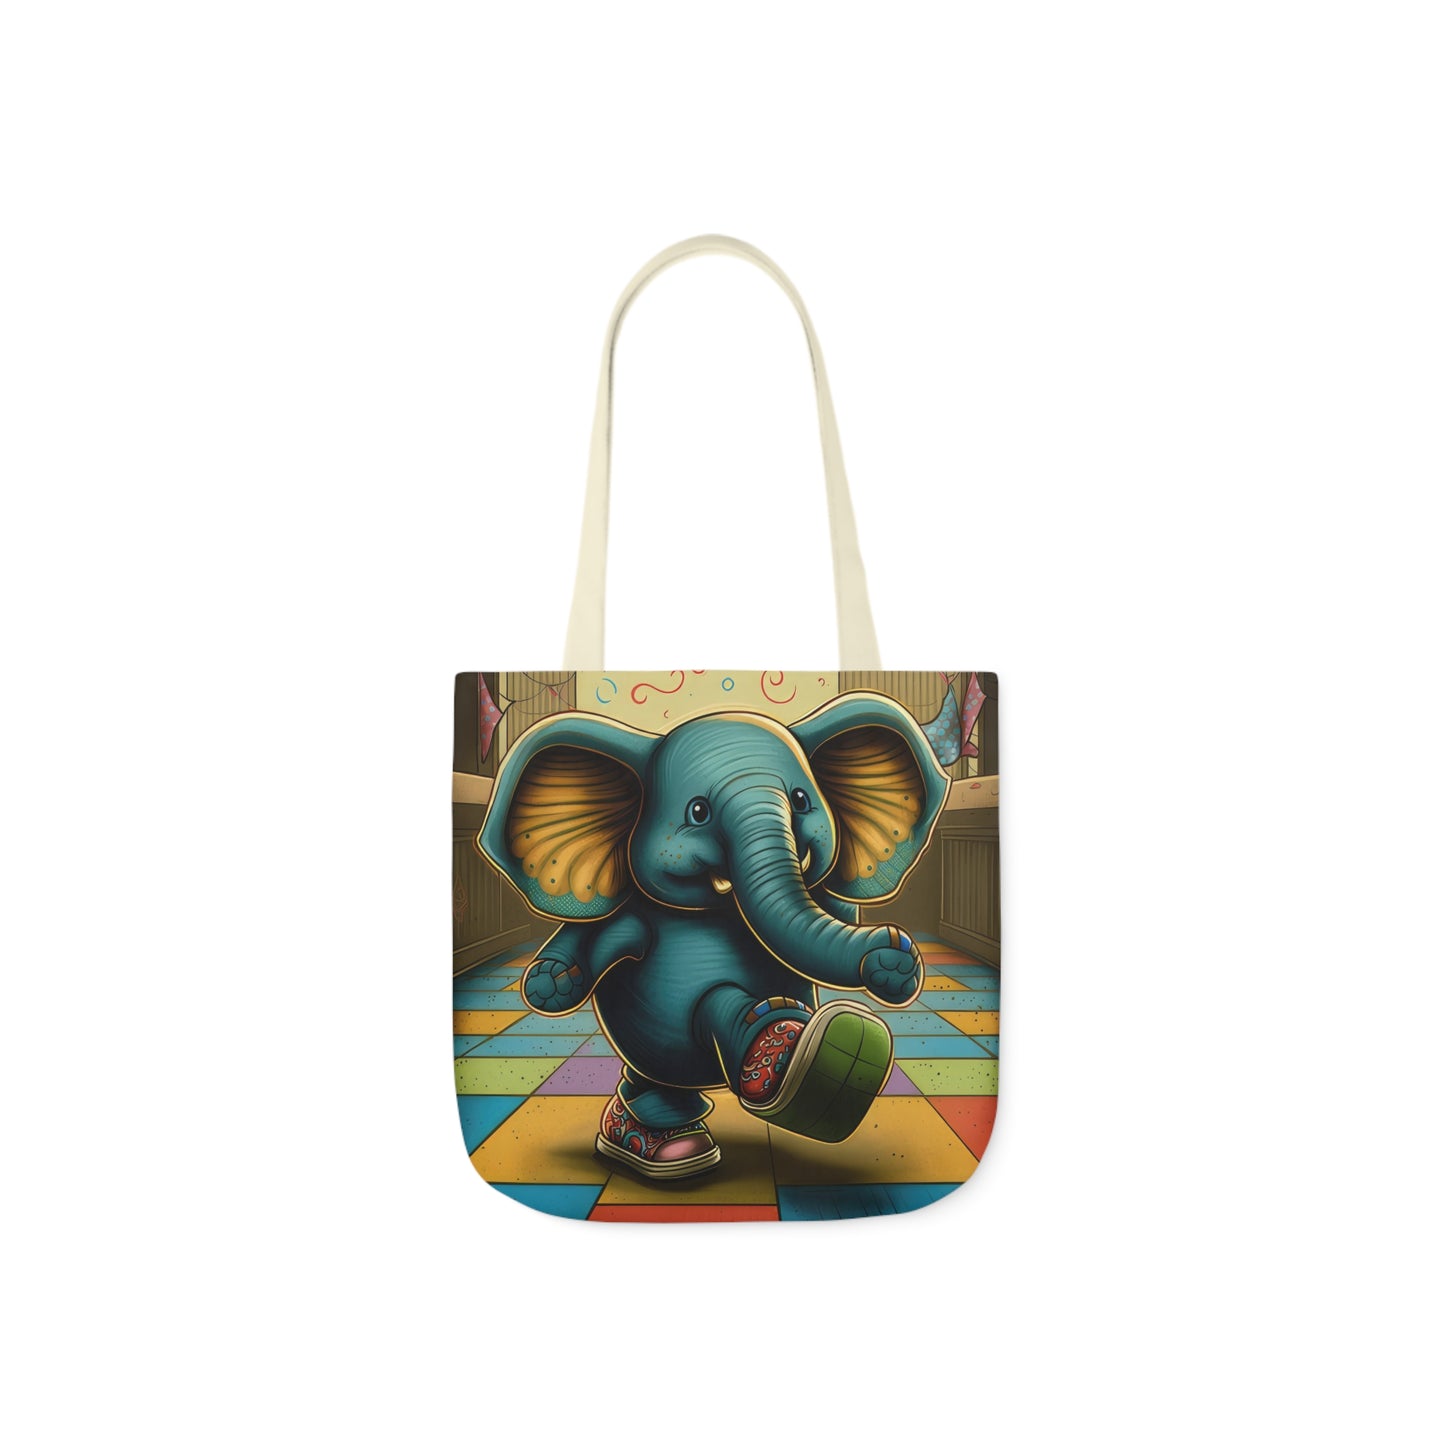 Elephant Kicking Leg On Colored Square Floor Polyester Canvas Tote Bag (AOP)